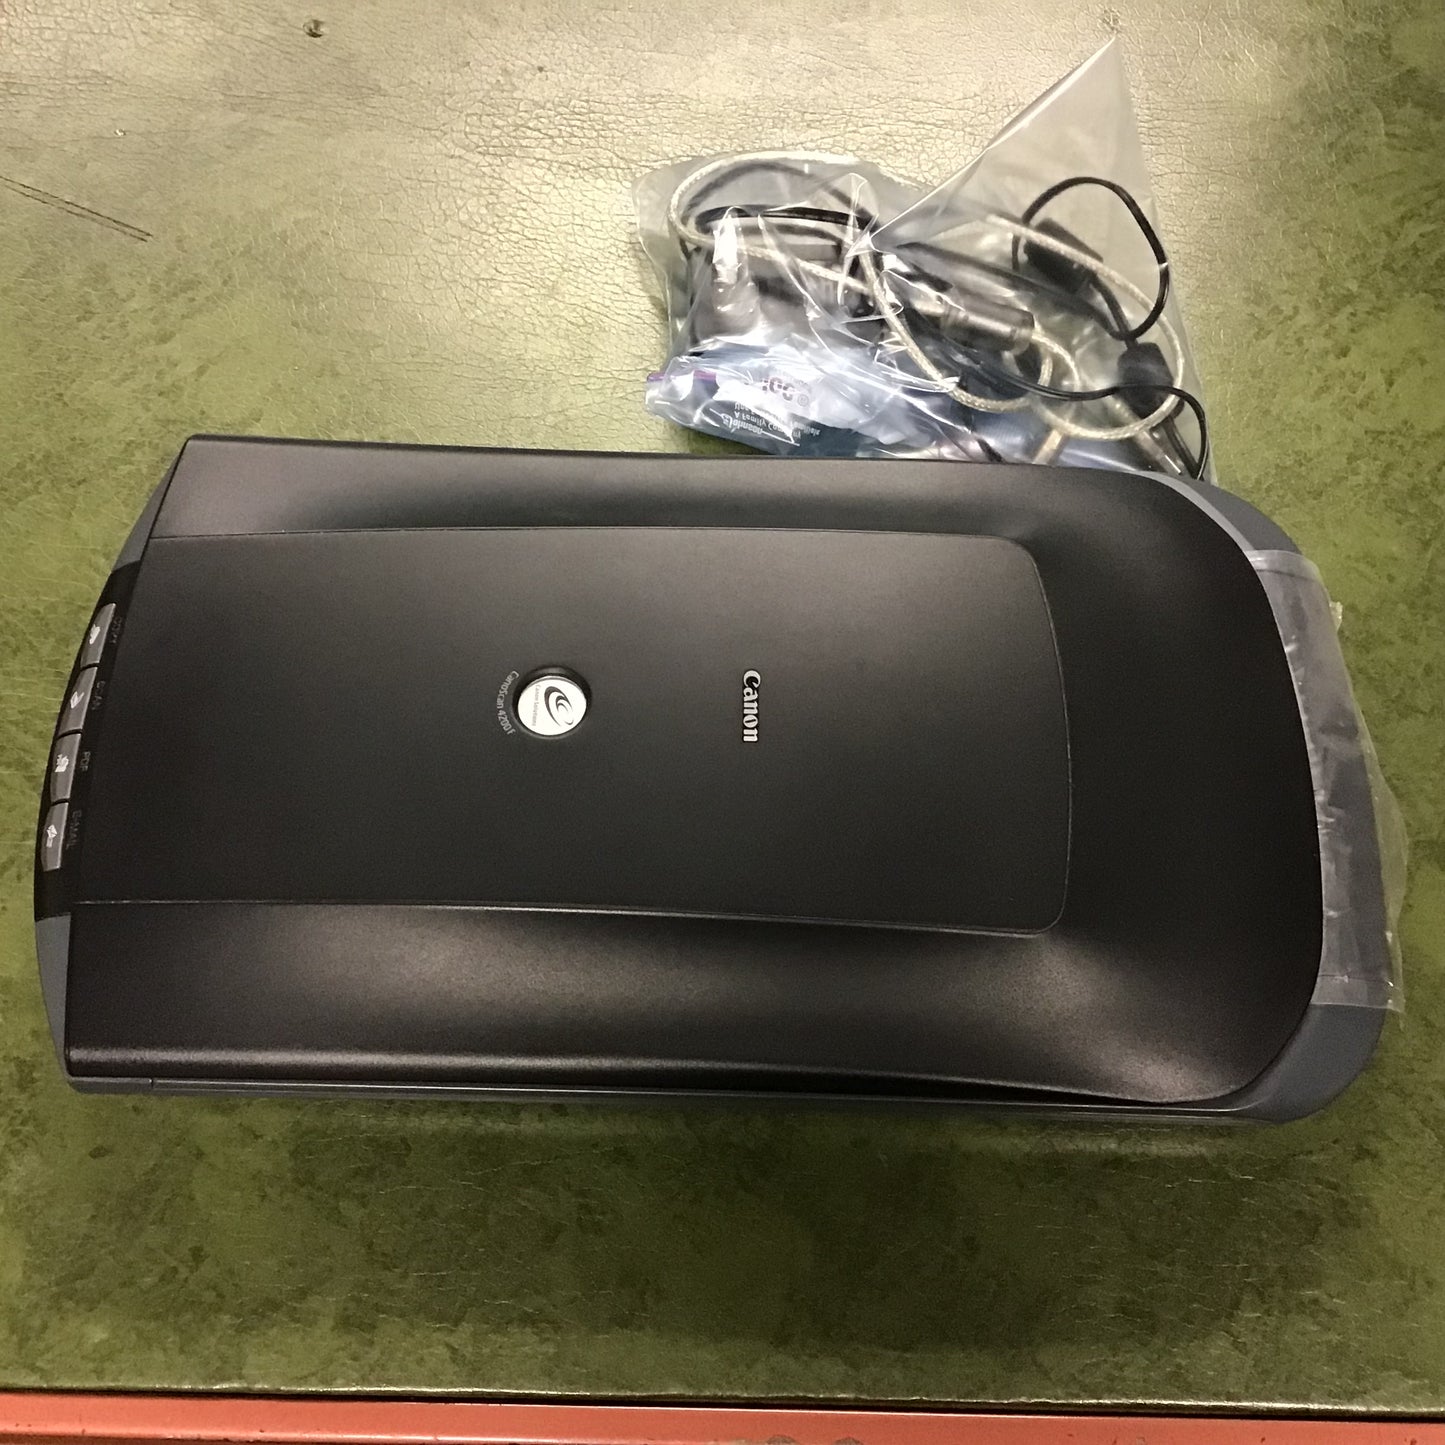 Canon CanoScan 4200F Flatbed Scanner